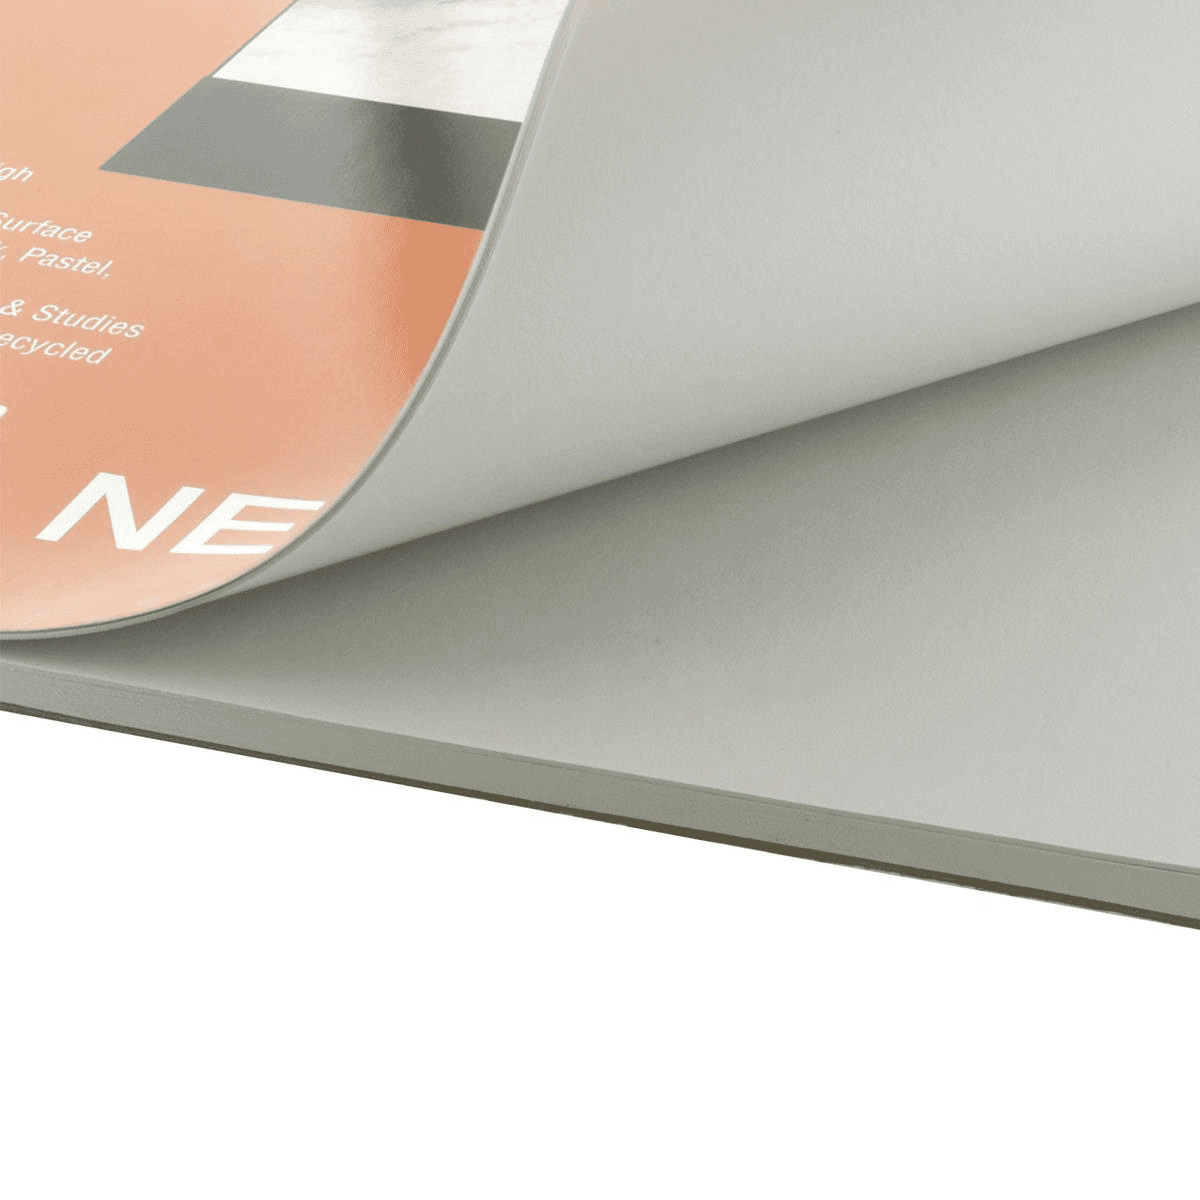 PRO ART 18-Inch by 24-Inch Rough Newsprint Paper Pad, 50 Sheets